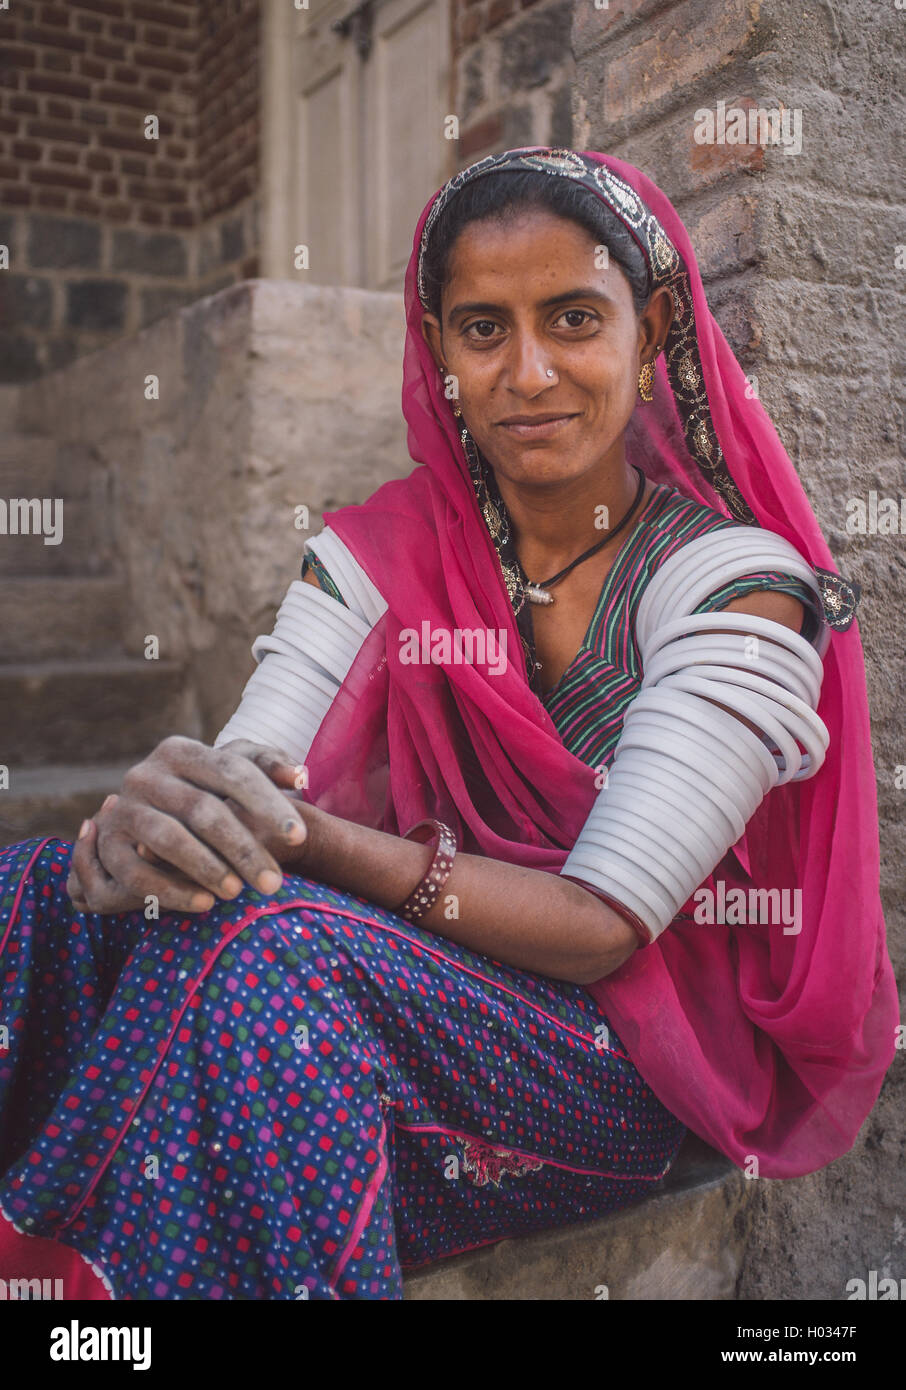 GODWAR REGION, INDIA - 15 FEBRUARY 2015: Indian tribeswoman sitting in front of home in saree decorated with upper-arm bracelets Stock Photo